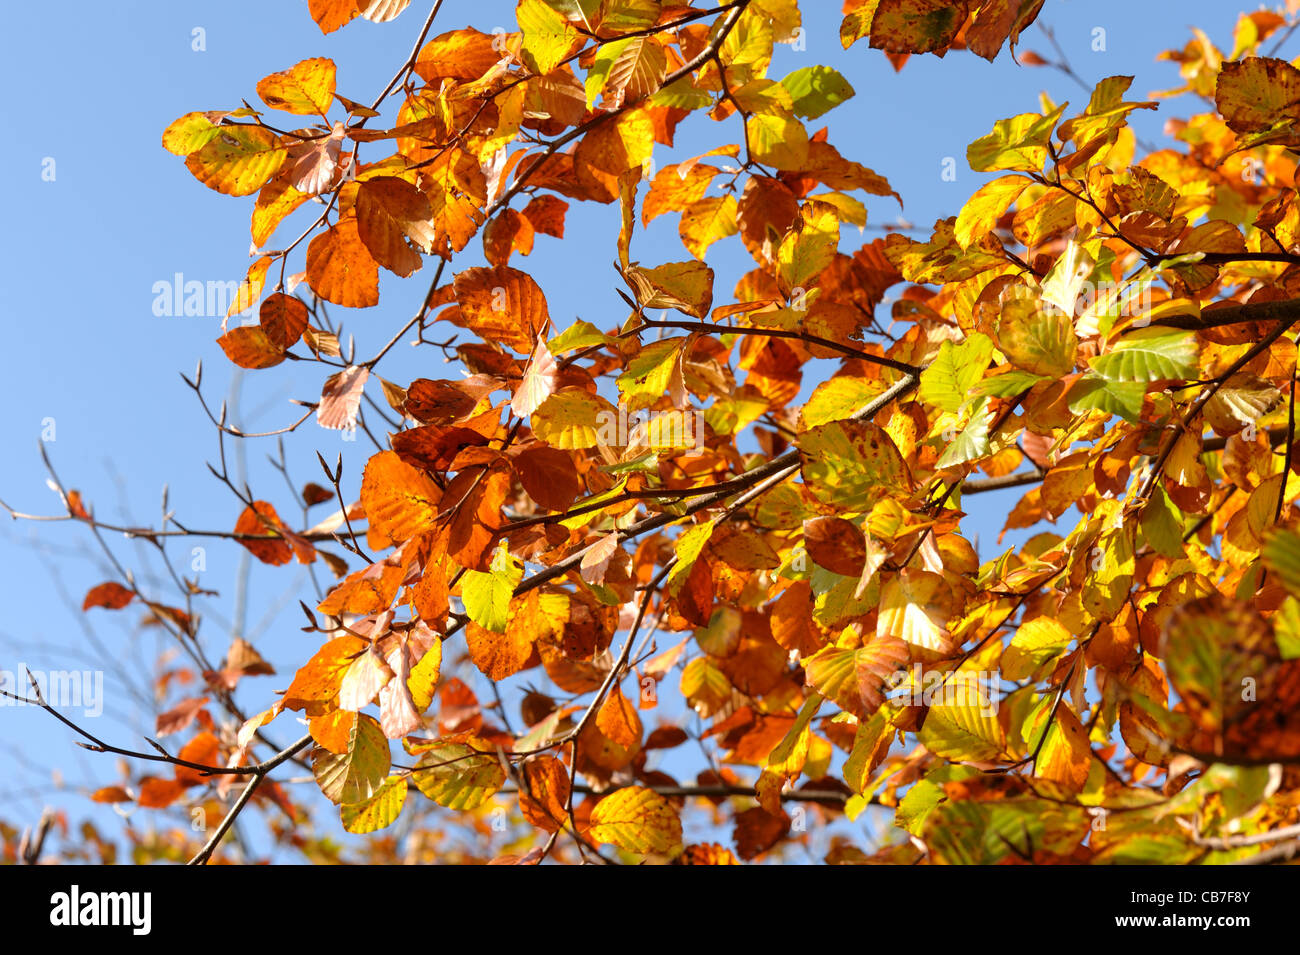 Rich golden beech leaves in autumn colour against a blue sky Stock Photo